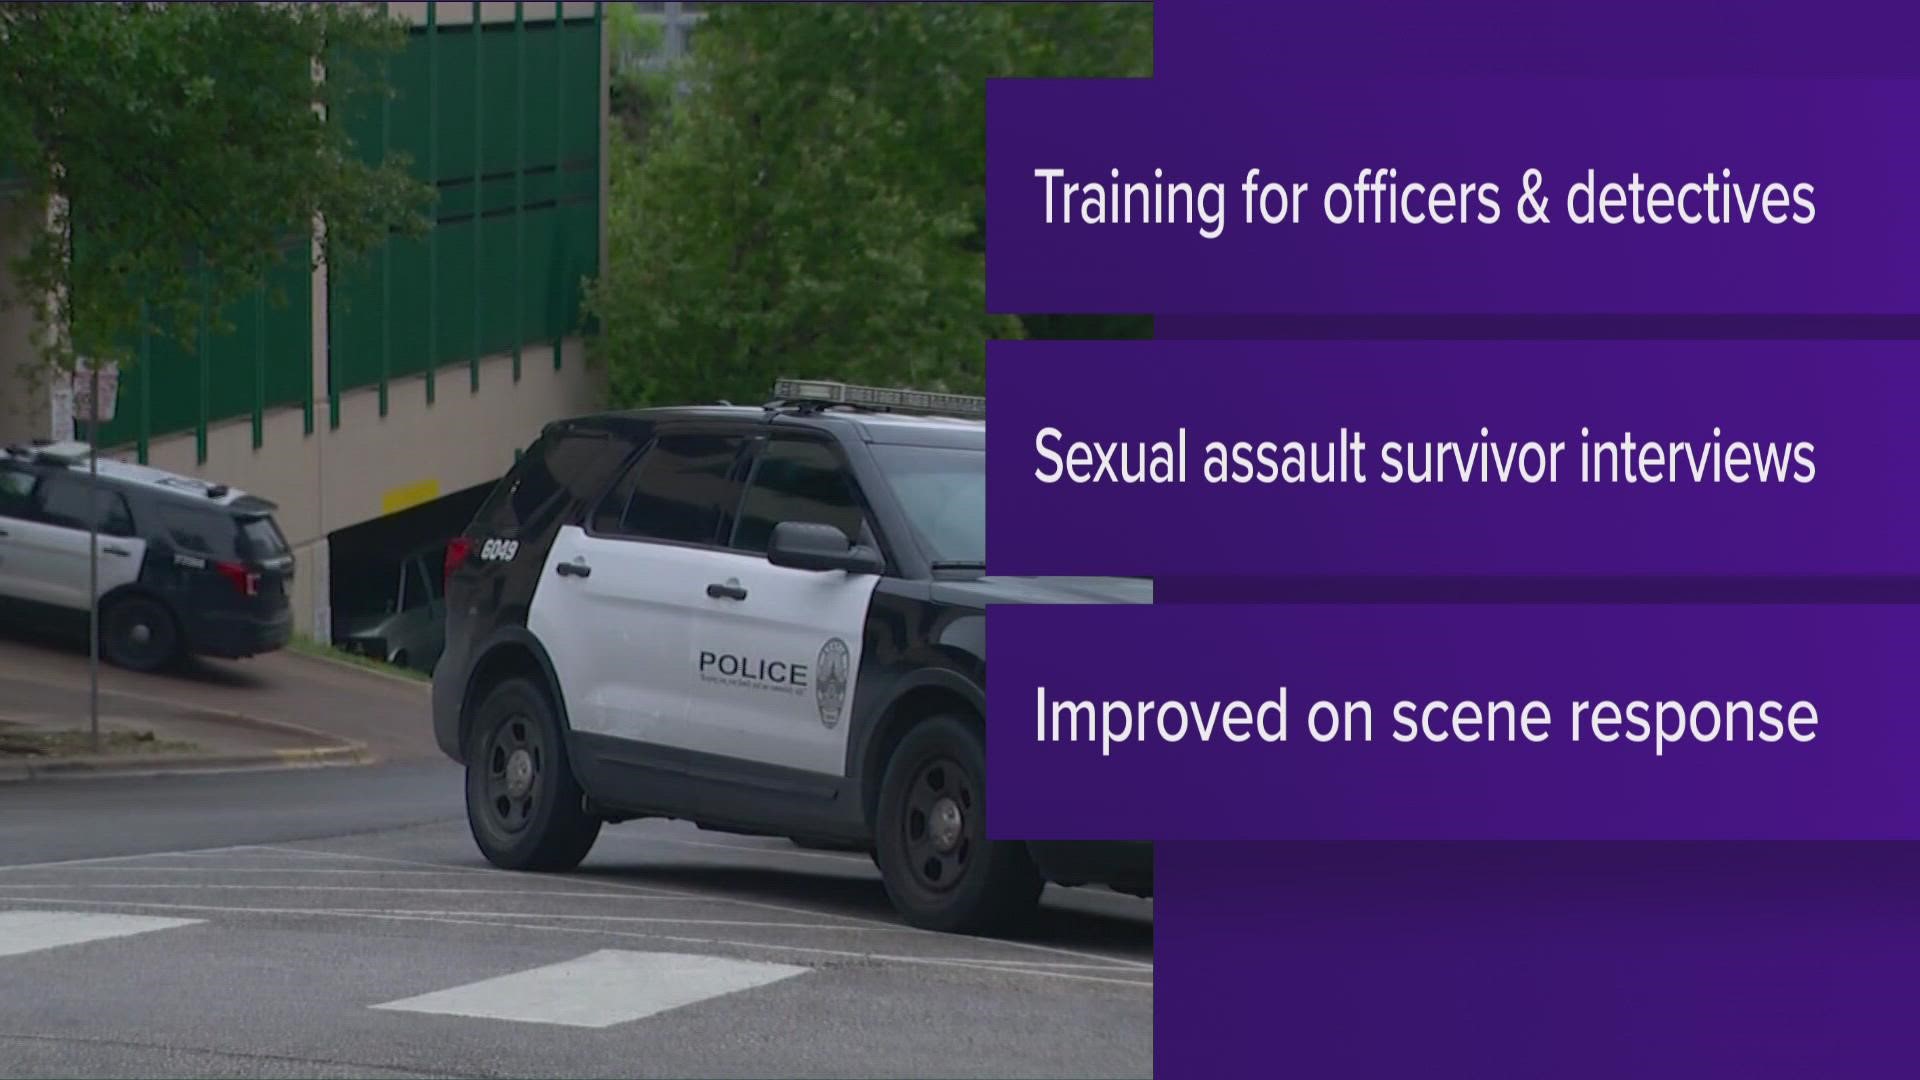 On Monday, the City of Austin released a report from an independent review detailing how the police department can better respond to sexual assault cases.